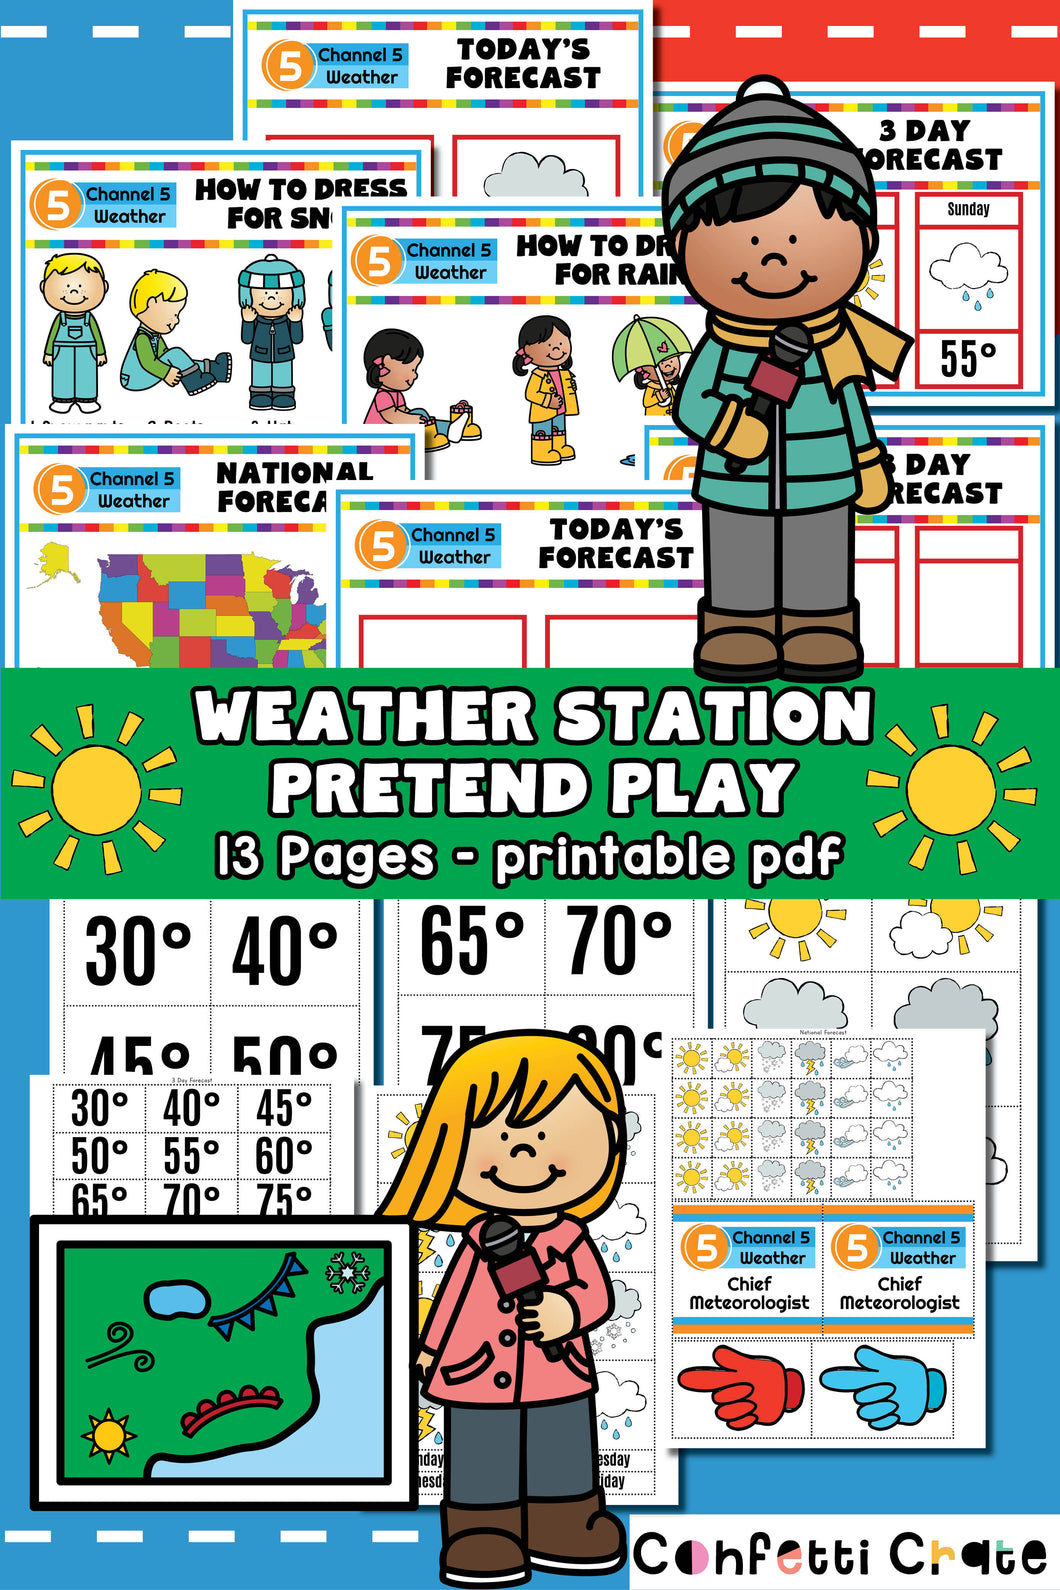 Weather station pretend play printables.